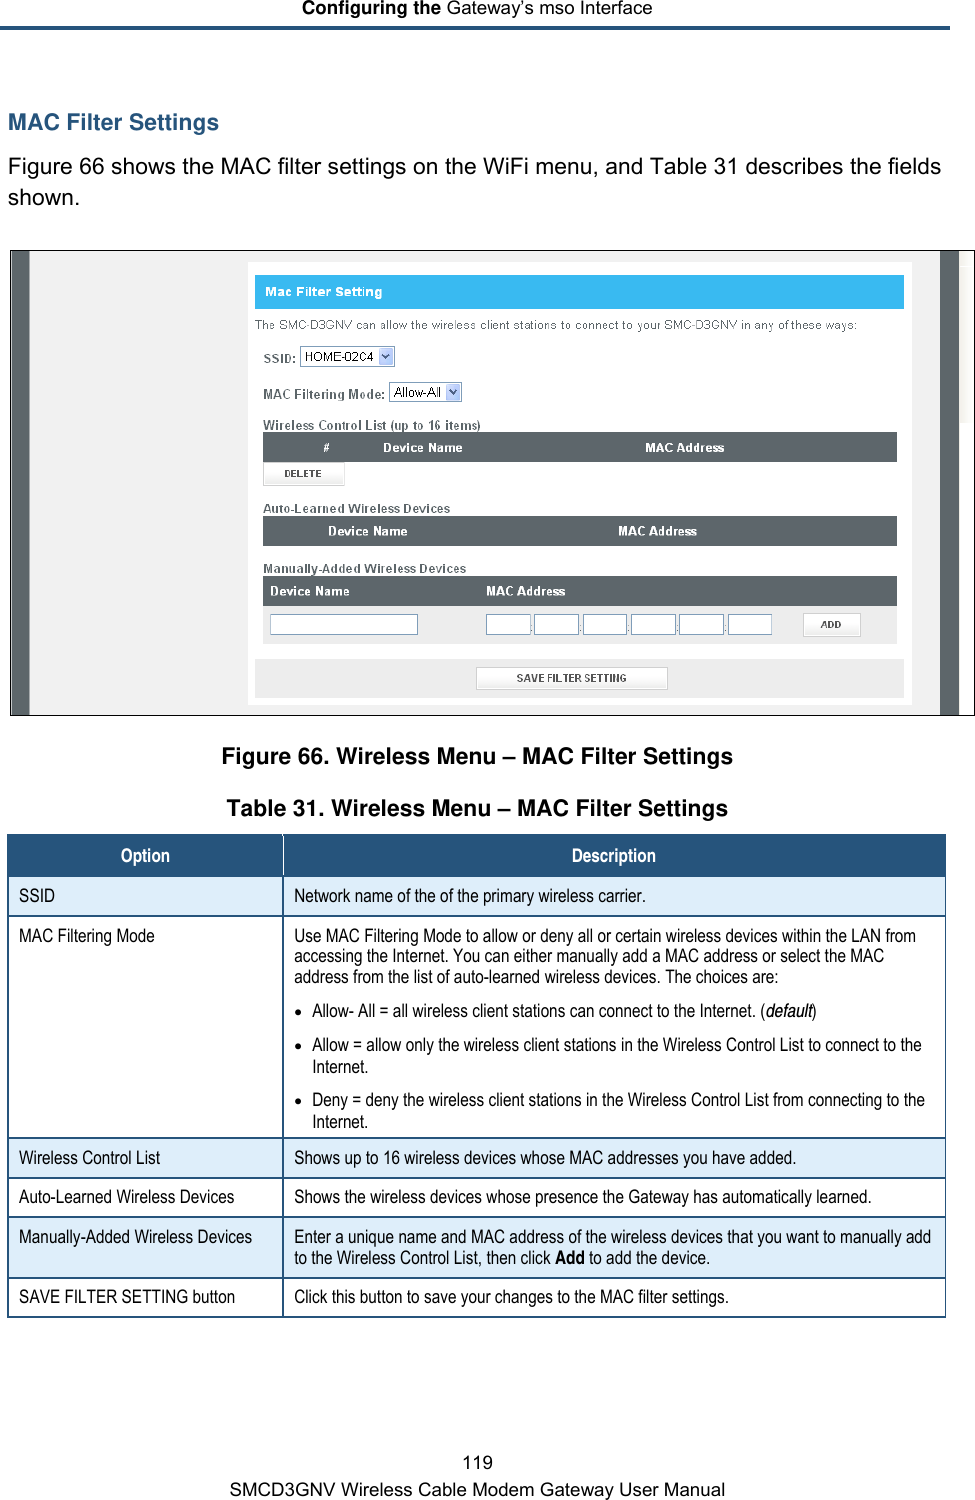 Configuring the Gateway’s mso Interface 119 SMCD3GNV Wireless Cable Modem Gateway User Manual MAC Filter Settings Figure 66 shows the MAC filter settings on the WiFi menu, and Table 31 describes the fields shown.  Figure 66. Wireless Menu – MAC Filter Settings Table 31. Wireless Menu – MAC Filter Settings Option Description SSID  Network name of the of the primary wireless carrier. MAC Filtering Mode Use MAC Filtering Mode to allow or deny all or certain wireless devices within the LAN from accessing the Internet. You can either manually add a MAC address or select the MAC address from the list of auto-learned wireless devices. The choices are: • Allow- All = all wireless client stations can connect to the Internet. (default) • Allow = allow only the wireless client stations in the Wireless Control List to connect to the Internet. • Deny = deny the wireless client stations in the Wireless Control List from connecting to the Internet. Wireless Control List Shows up to 16 wireless devices whose MAC addresses you have added. Auto-Learned Wireless Devices Shows the wireless devices whose presence the Gateway has automatically learned. Manually-Added Wireless Devices Enter a unique name and MAC address of the wireless devices that you want to manually add to the Wireless Control List, then click Add to add the device. SAVE FILTER SETTING button Click this button to save your changes to the MAC filter settings. 